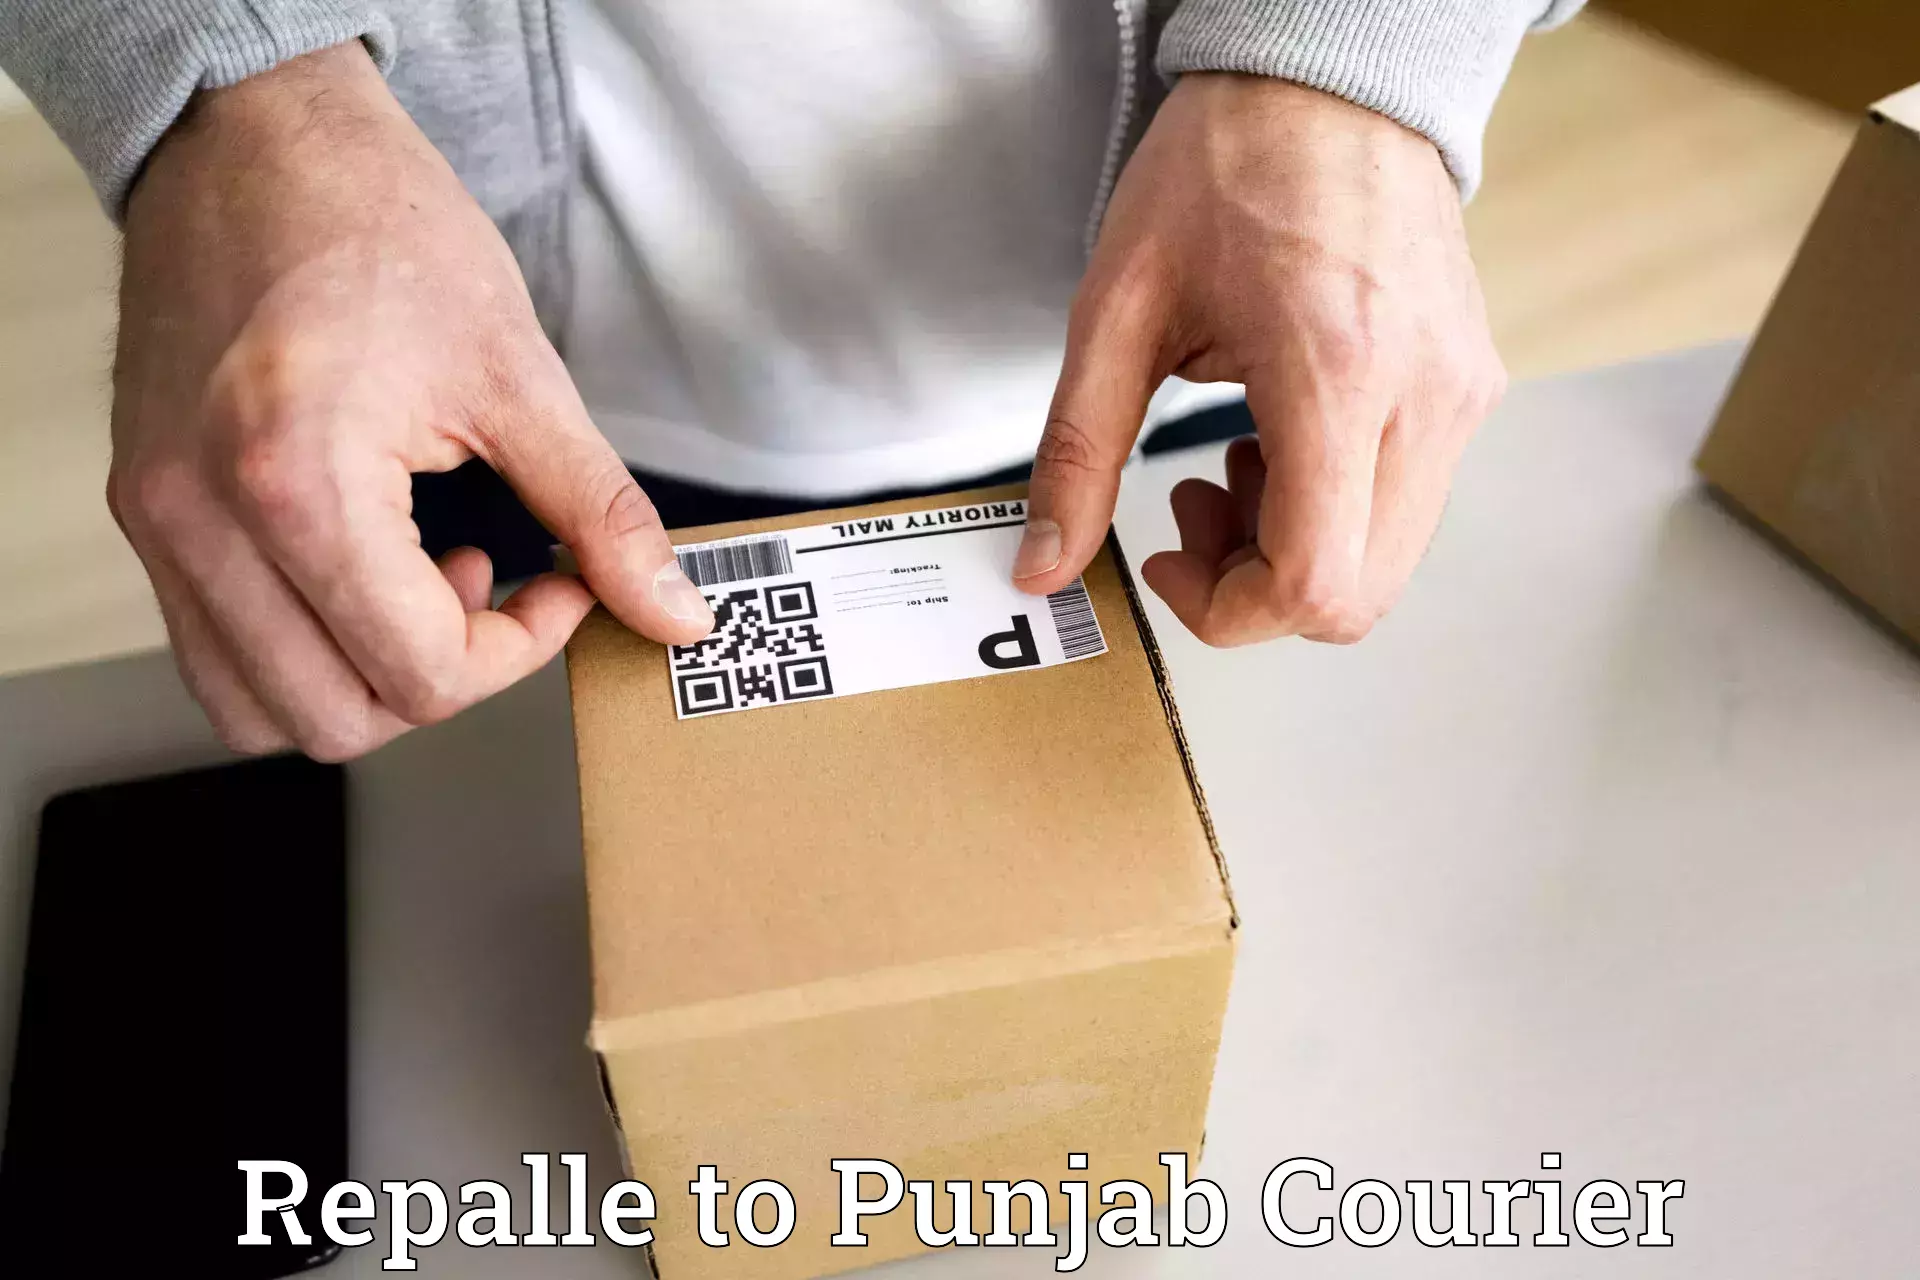 Courier service innovation Repalle to Central University of Punjab Bathinda